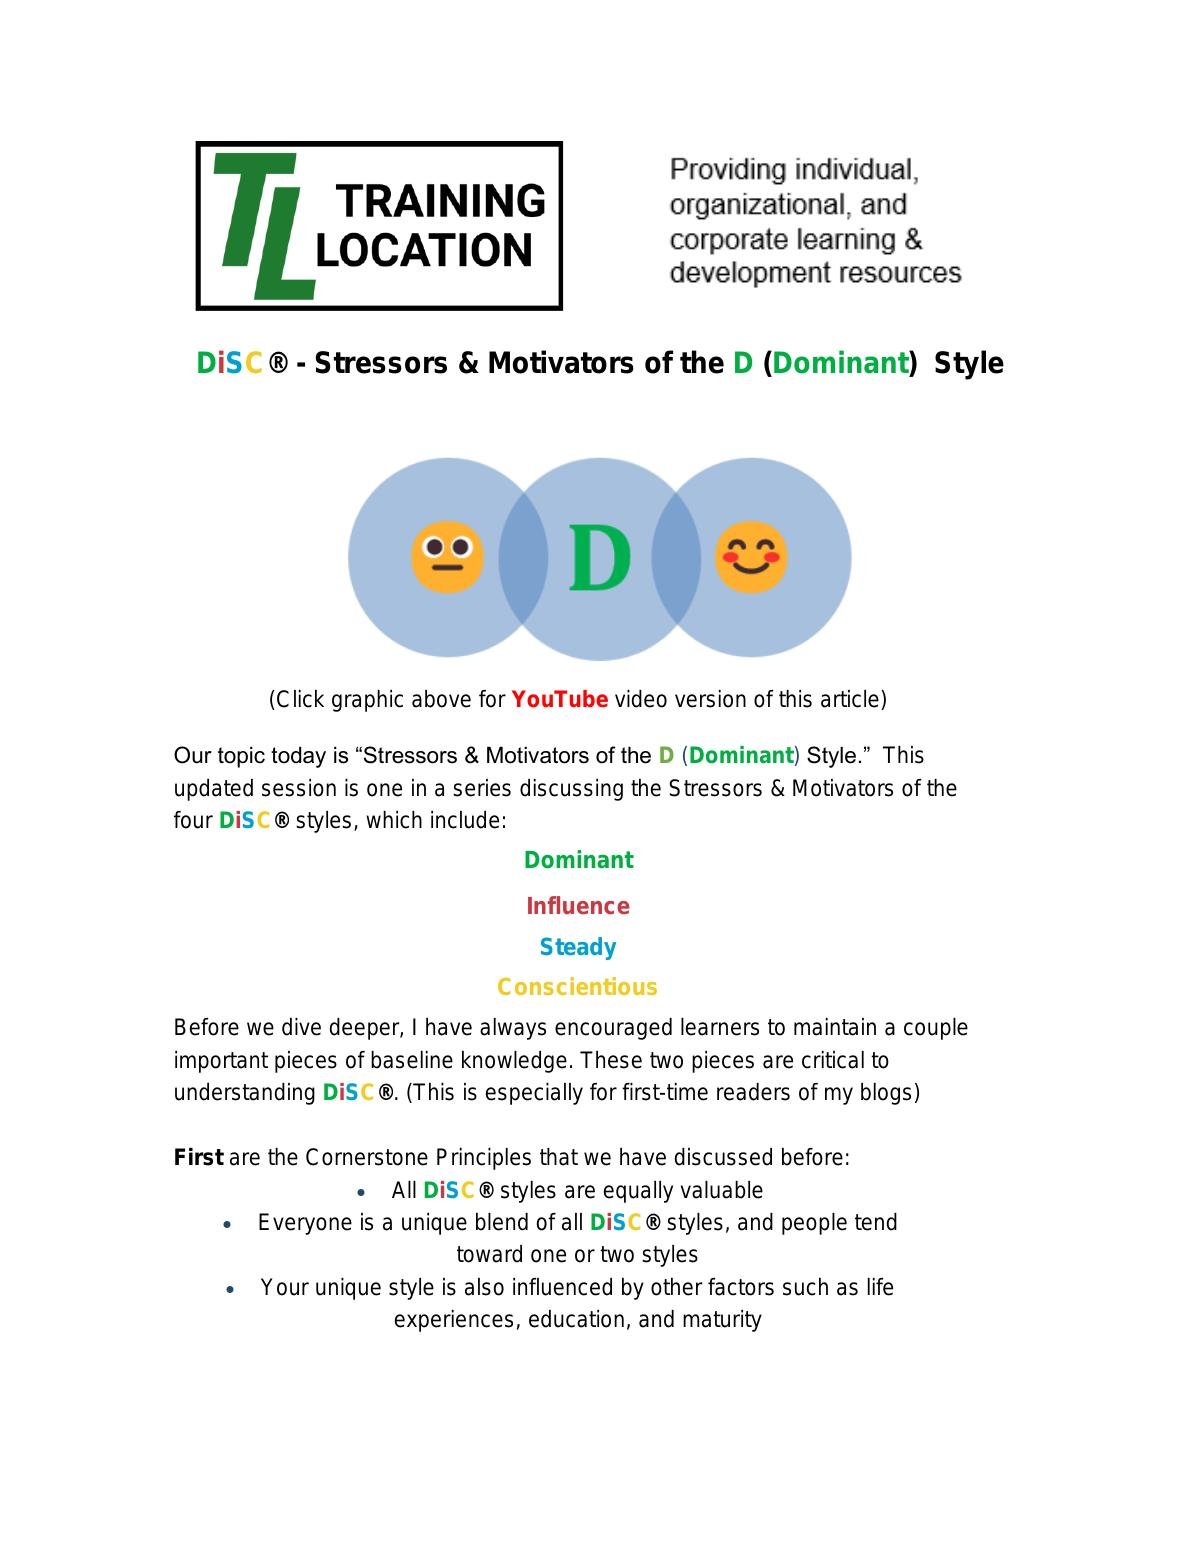 DiSC® - Stressors & Motivators of the D (Dominant) Style